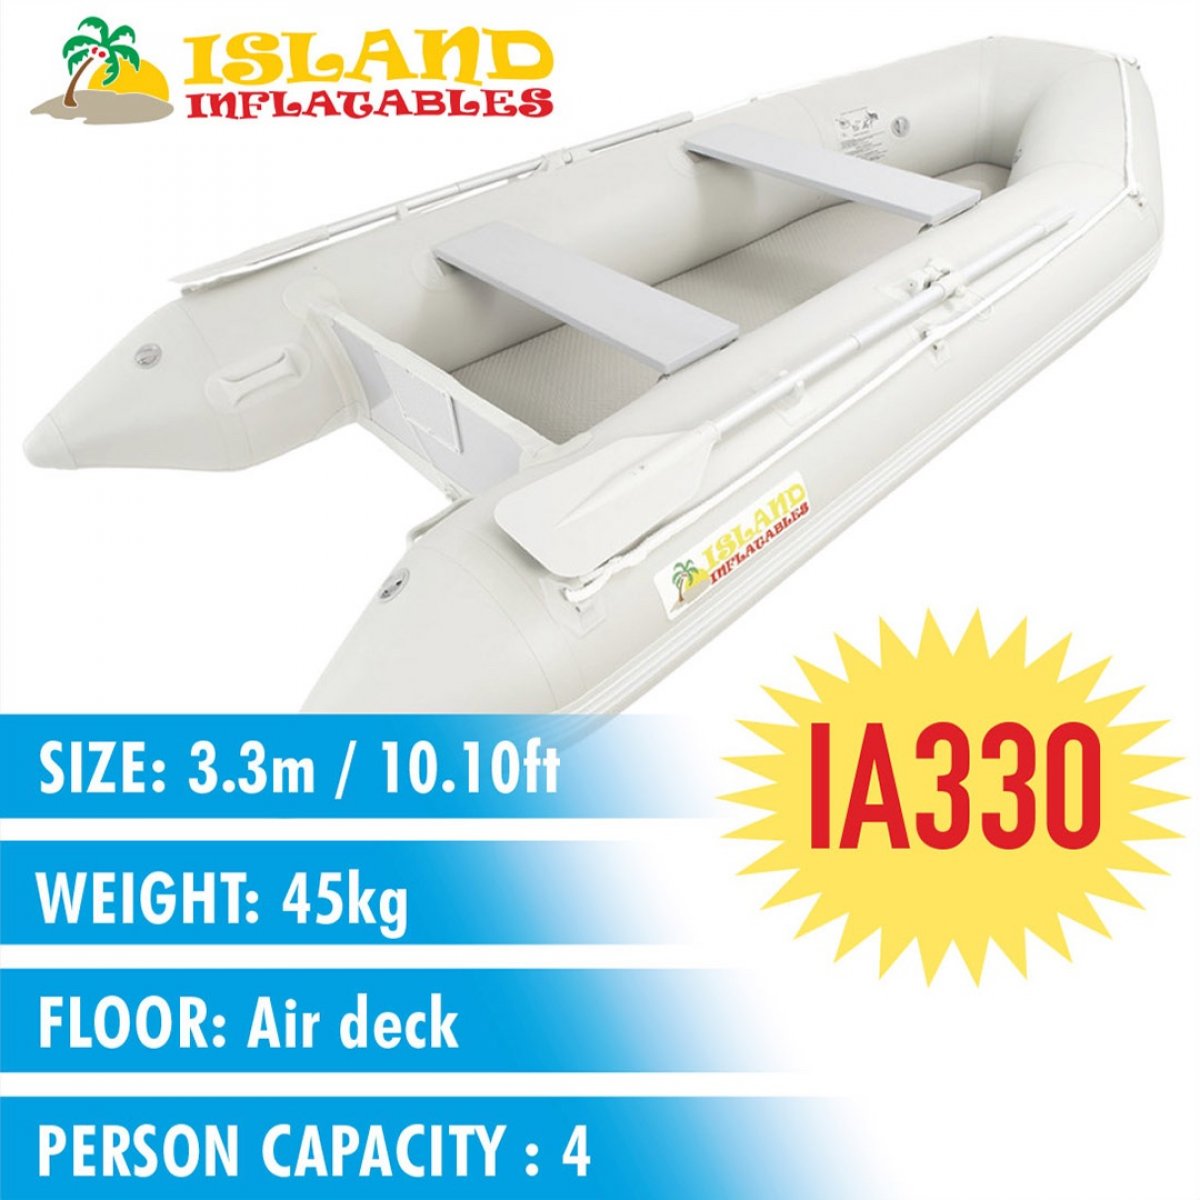 New Island Inflatables Island Airdeck 330 - Welded PVC